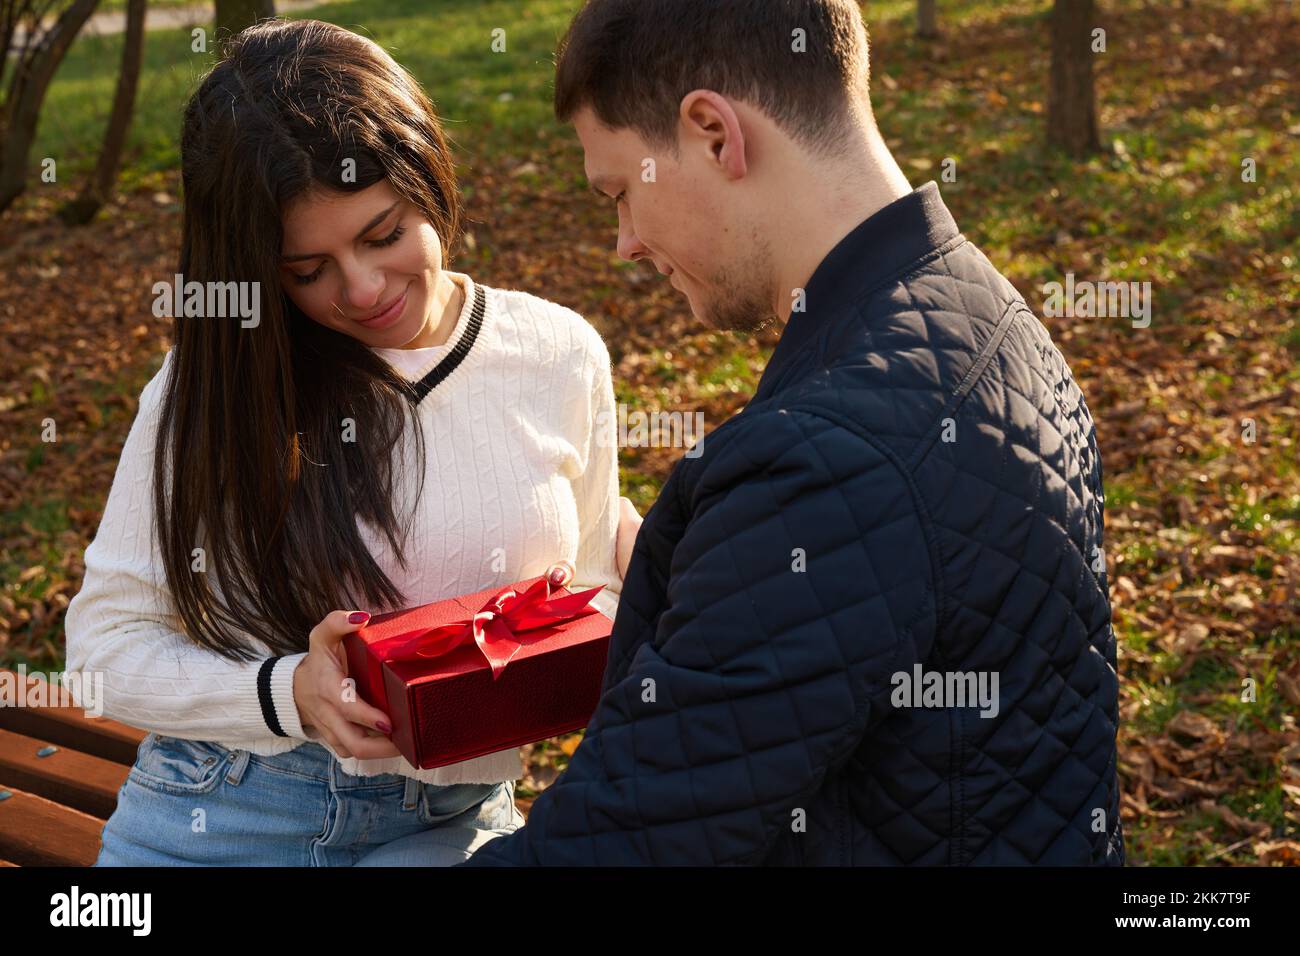 Pretty young woman accepts a gift box from her boyfriend Stock Photo